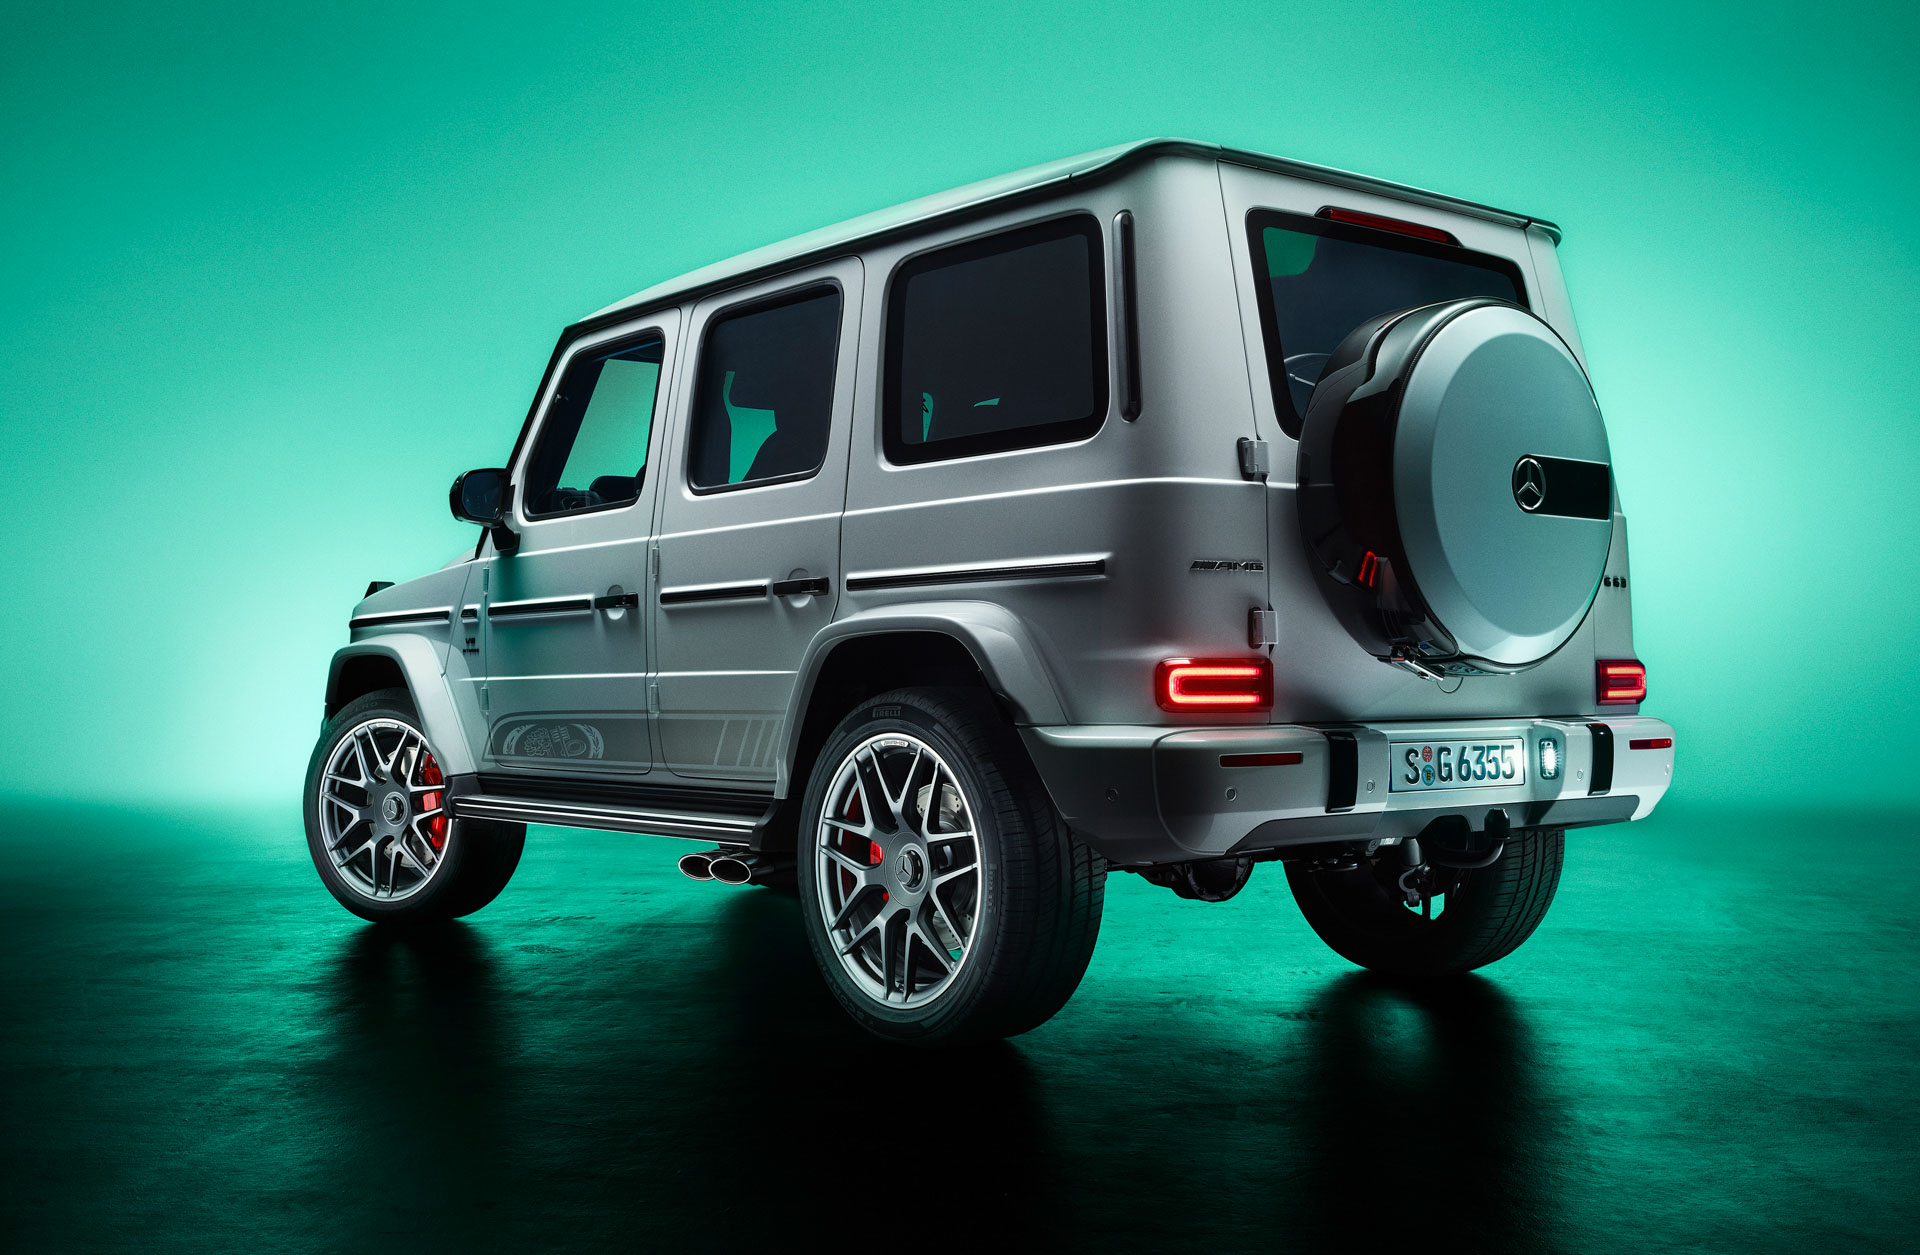 https://www.carscoops.com/wp-content/uploads/2022/03/Mercedes-AMG-G-63-Edition-55-00001.jpg